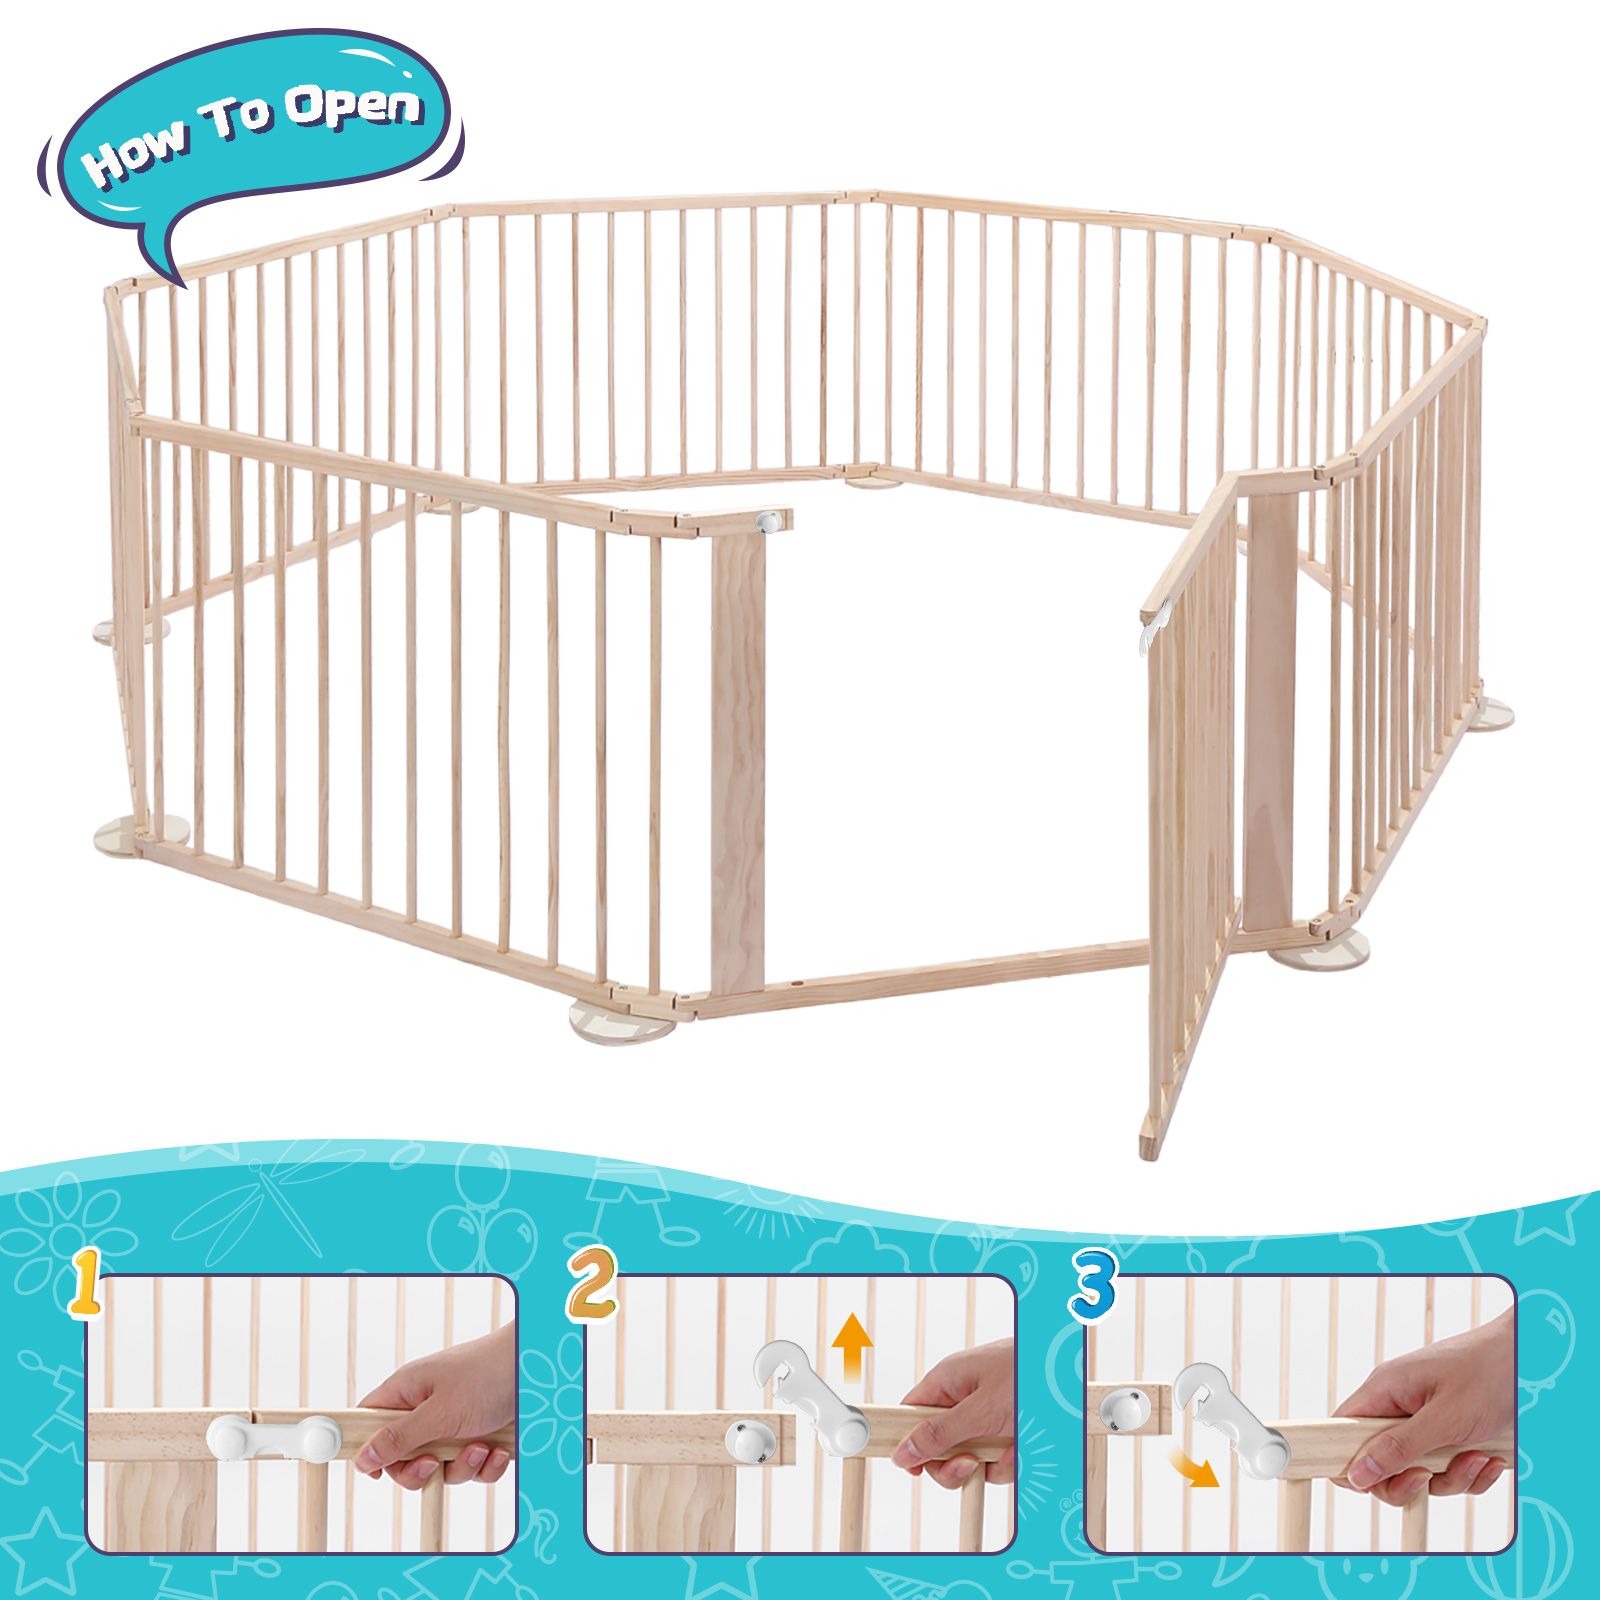 8 Panels Baby Playpen Gate Pen Playground Activity Centre Dog Pet Cat Safety Fence Enclosure Barrier Pine Wood Play Room Portable